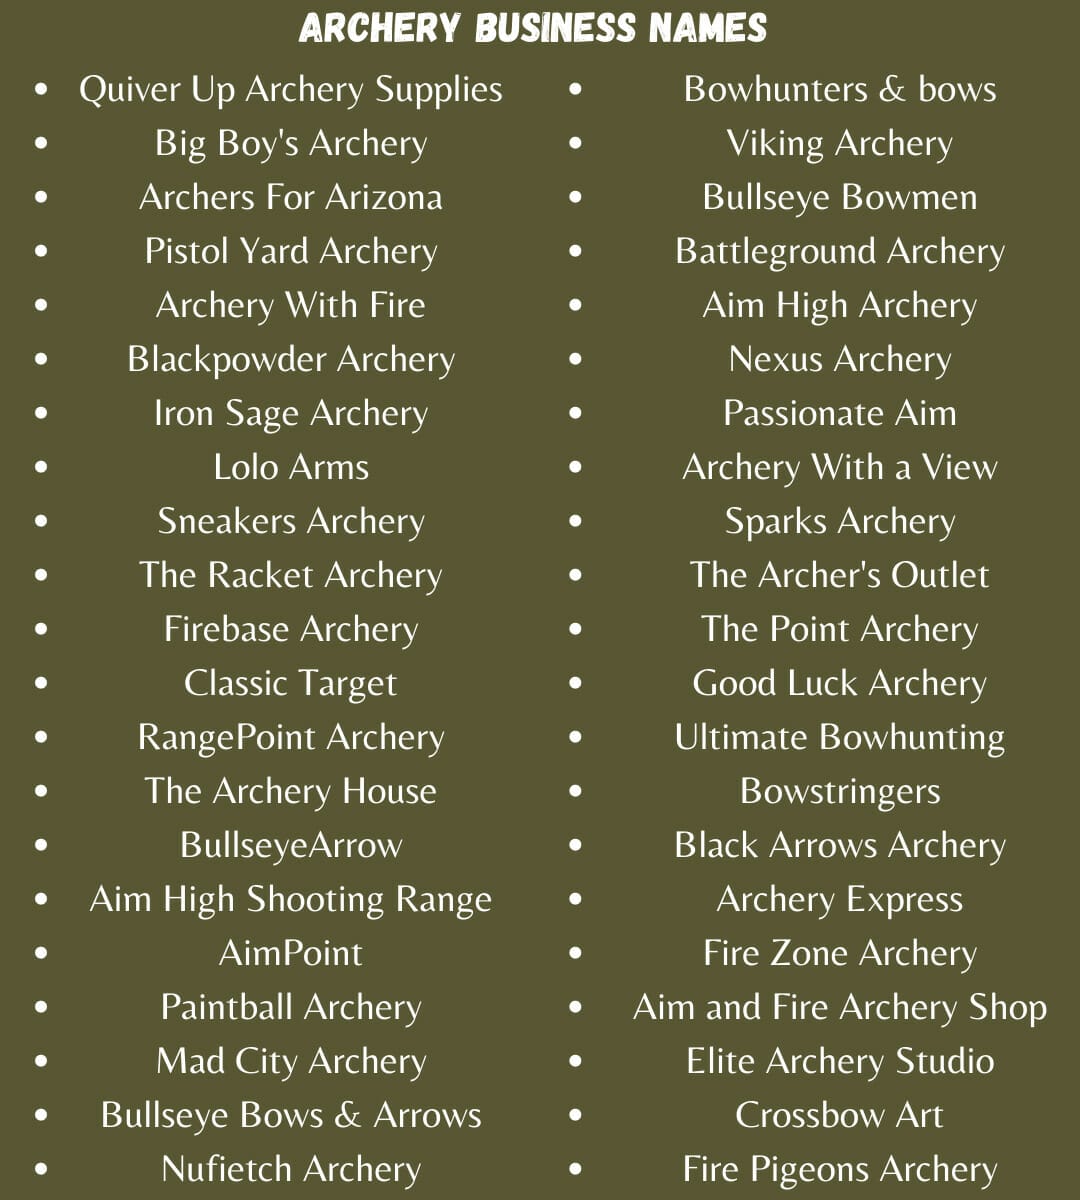 Archery Business Names